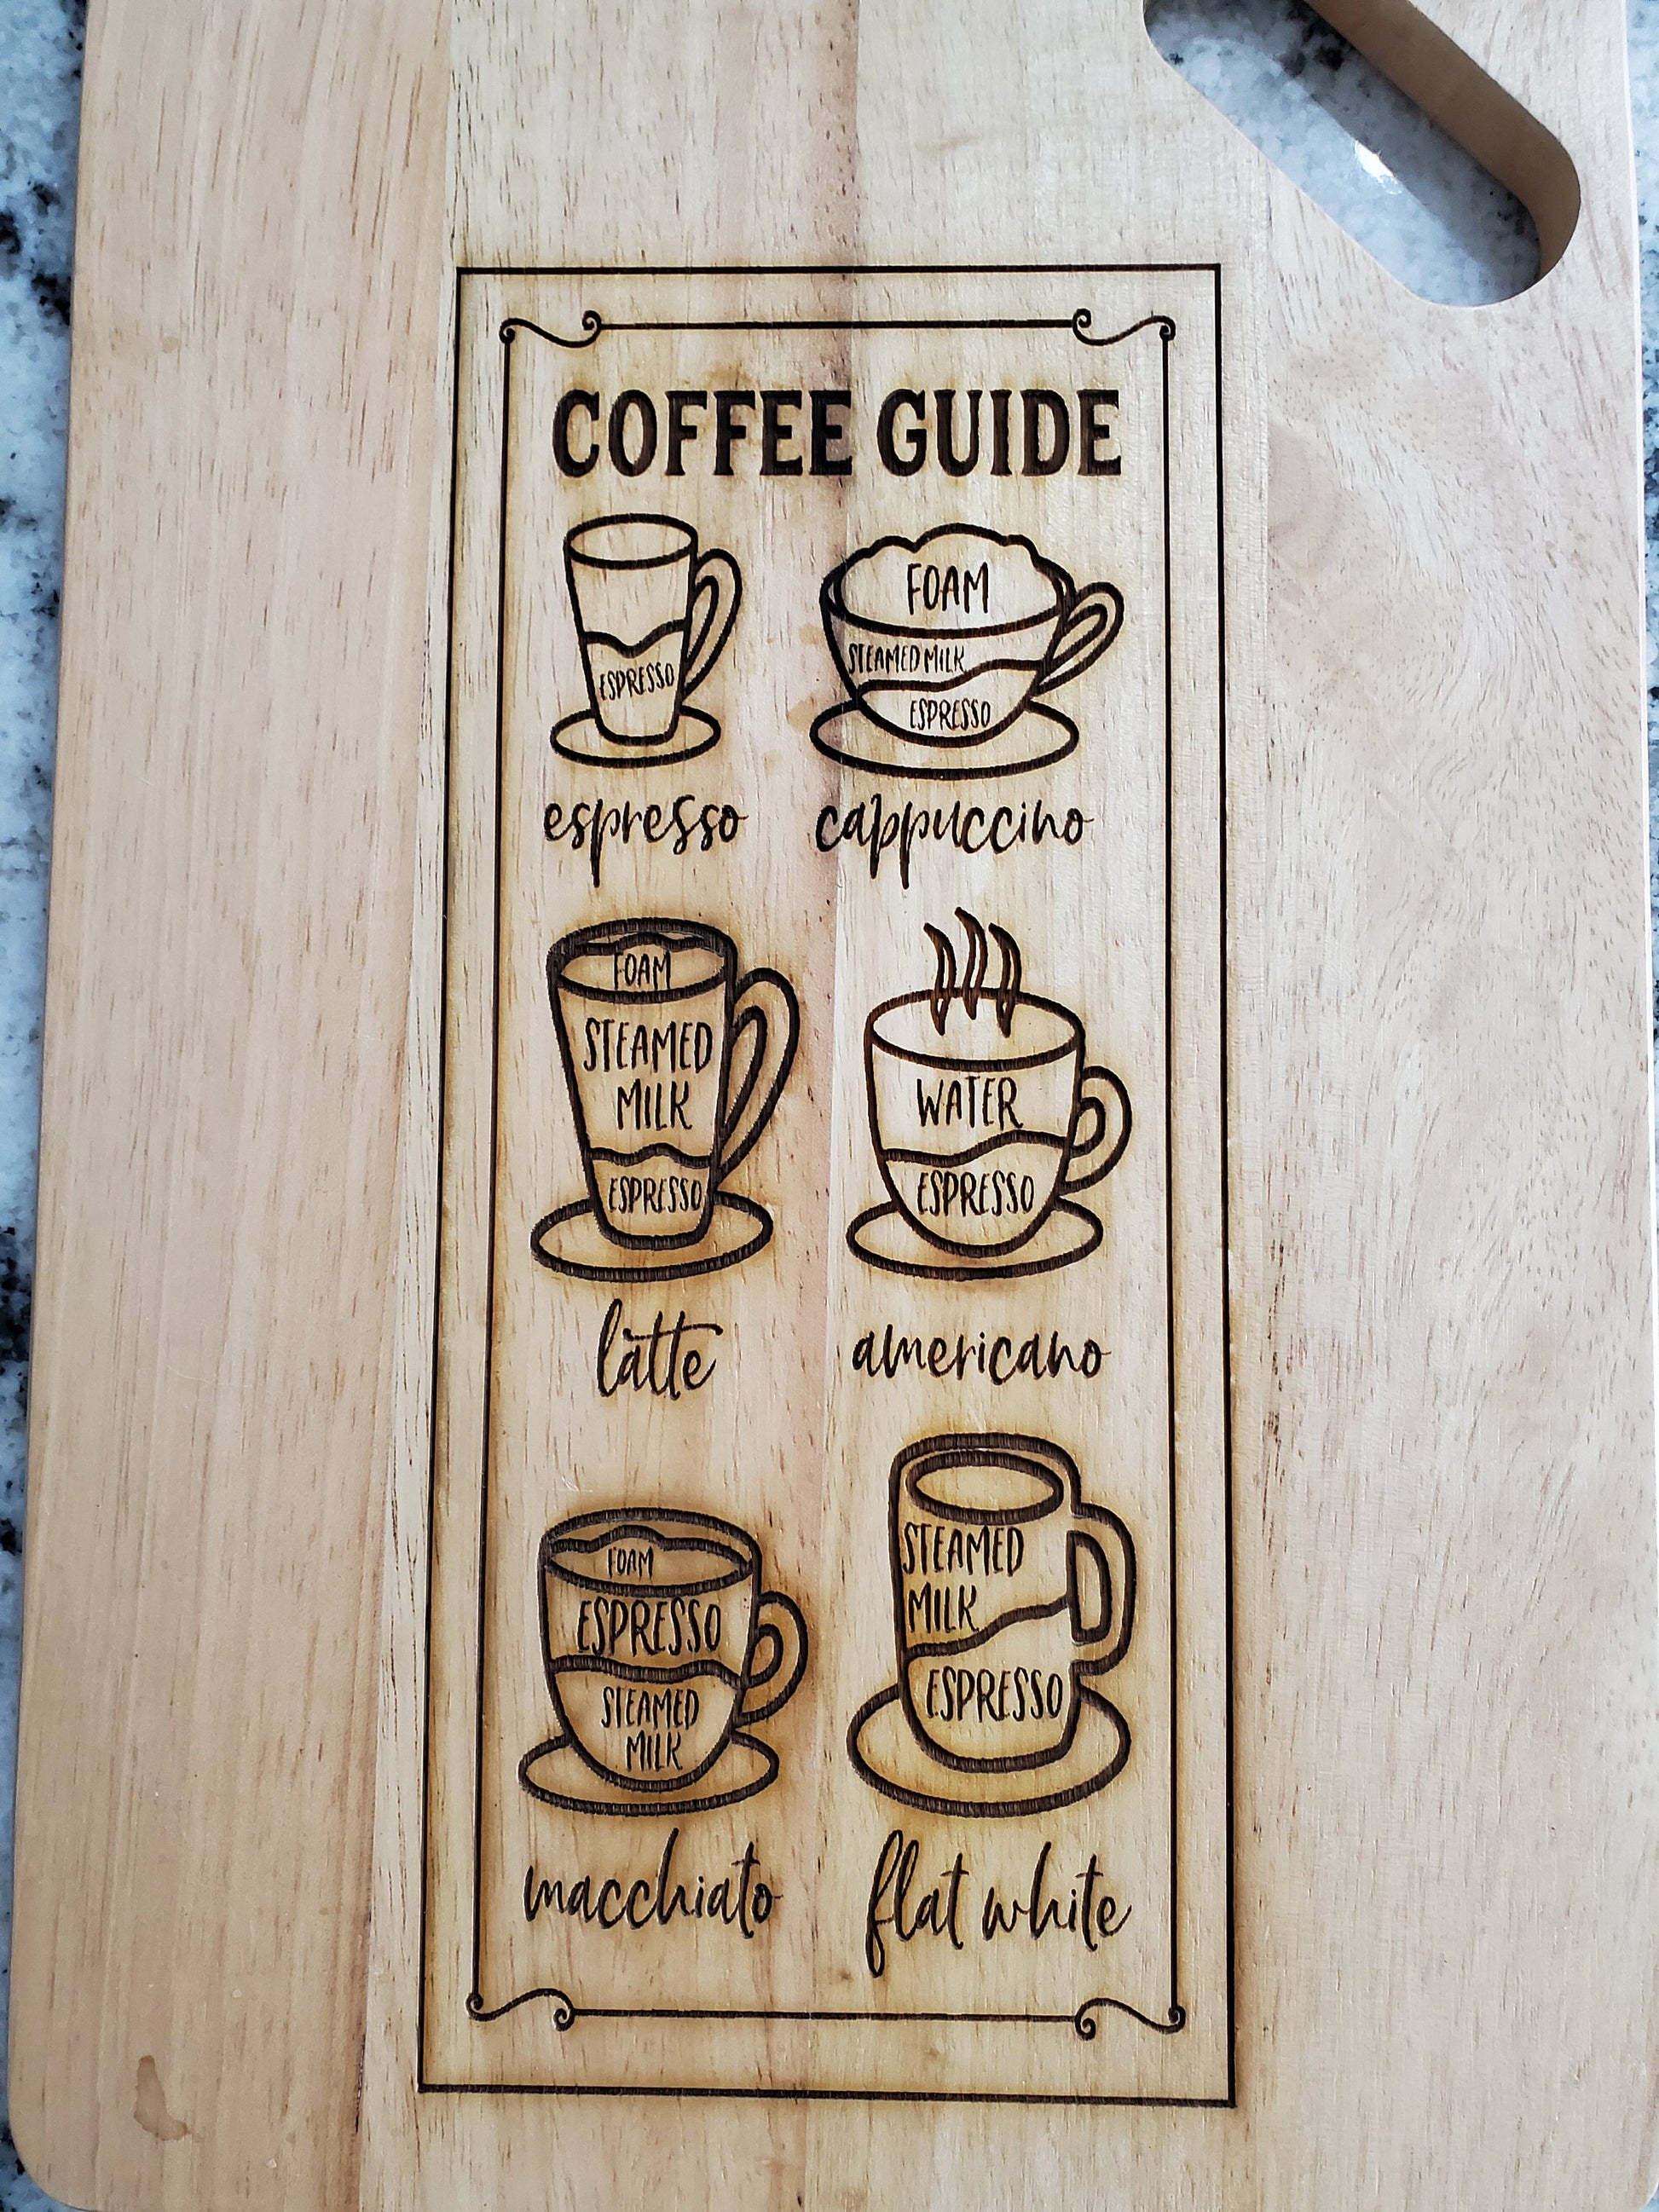 Coffee Instruction Cutting Board Expresso Latte Americano Cappuccino Kitchen How To Chart Graph Bar Gift Hardwood Engraved Wood Measurement